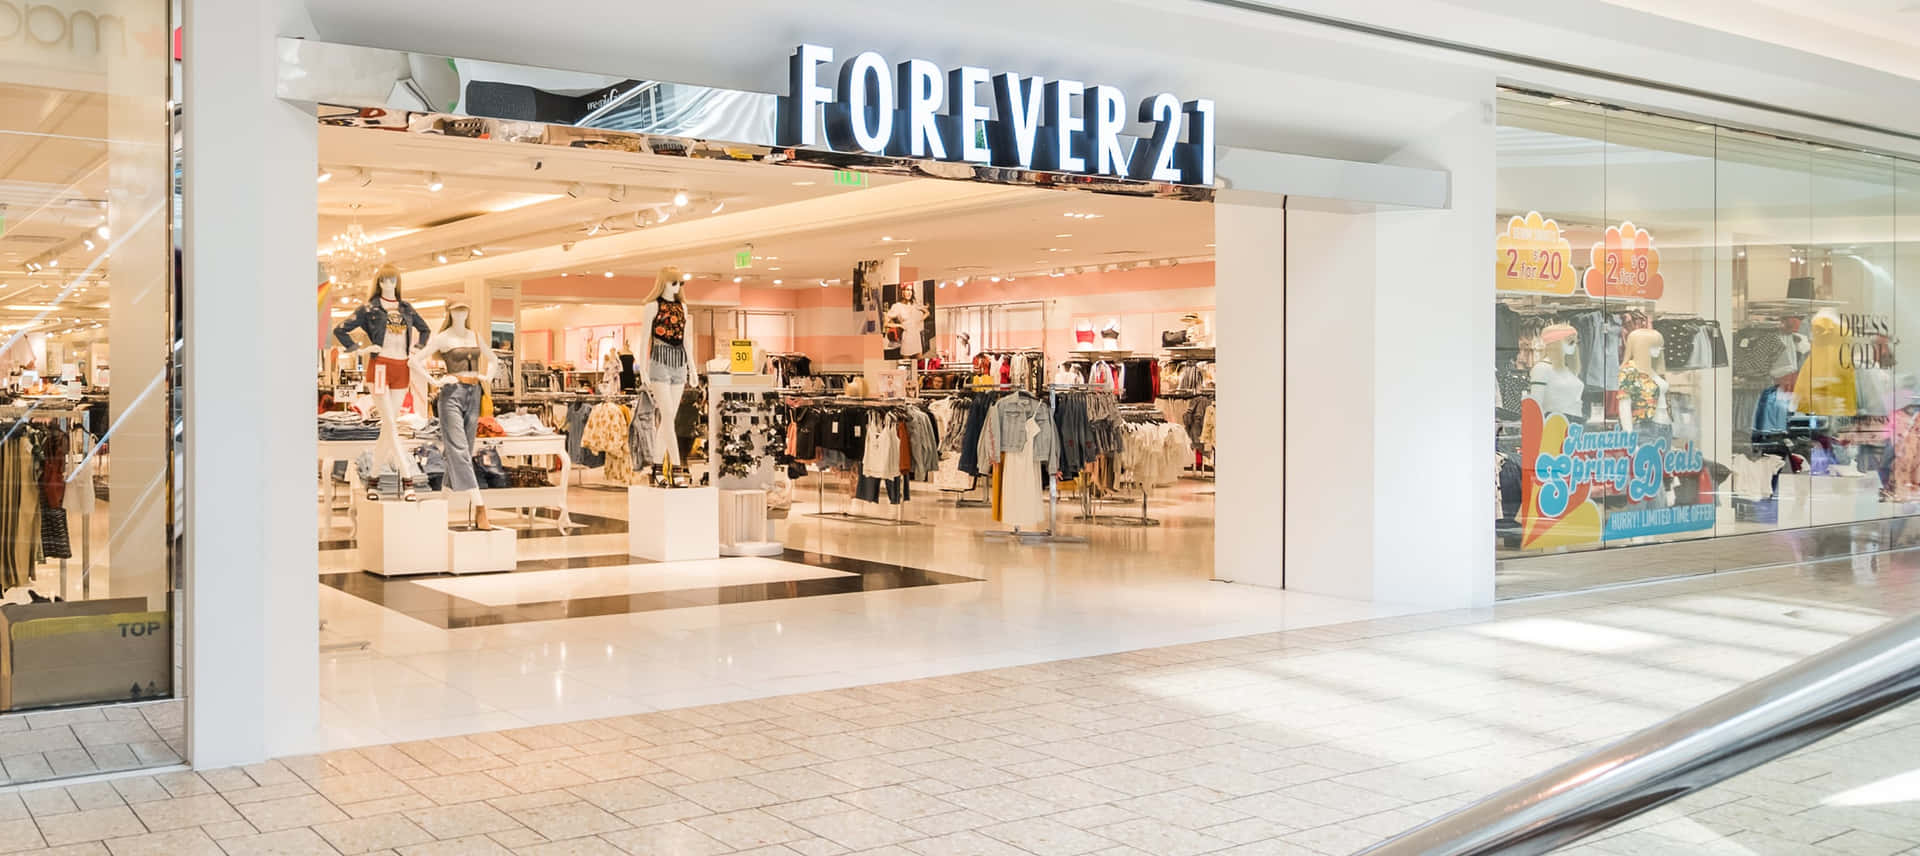 Shop the latest trends with Forever 21